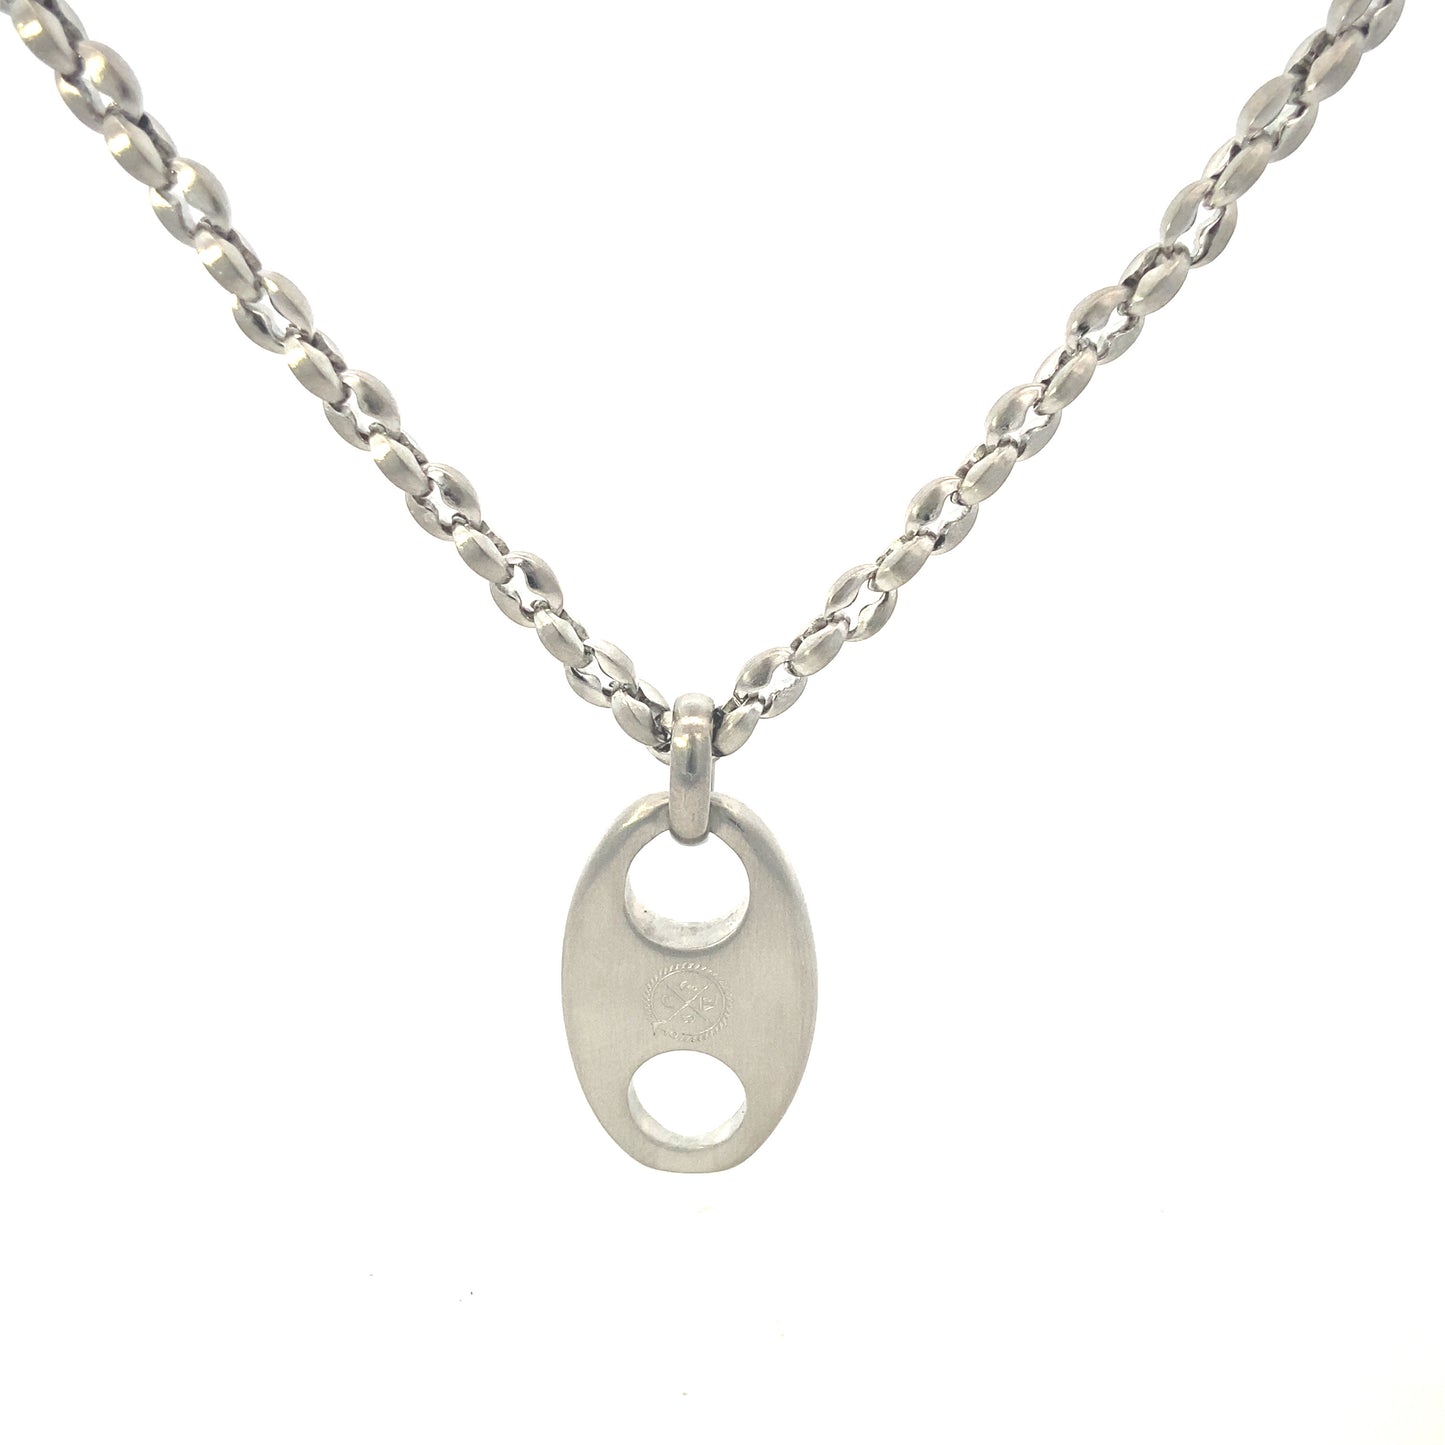 Mariner Chain w Mariner Link Pendant Silver | Seaknots | Luby 